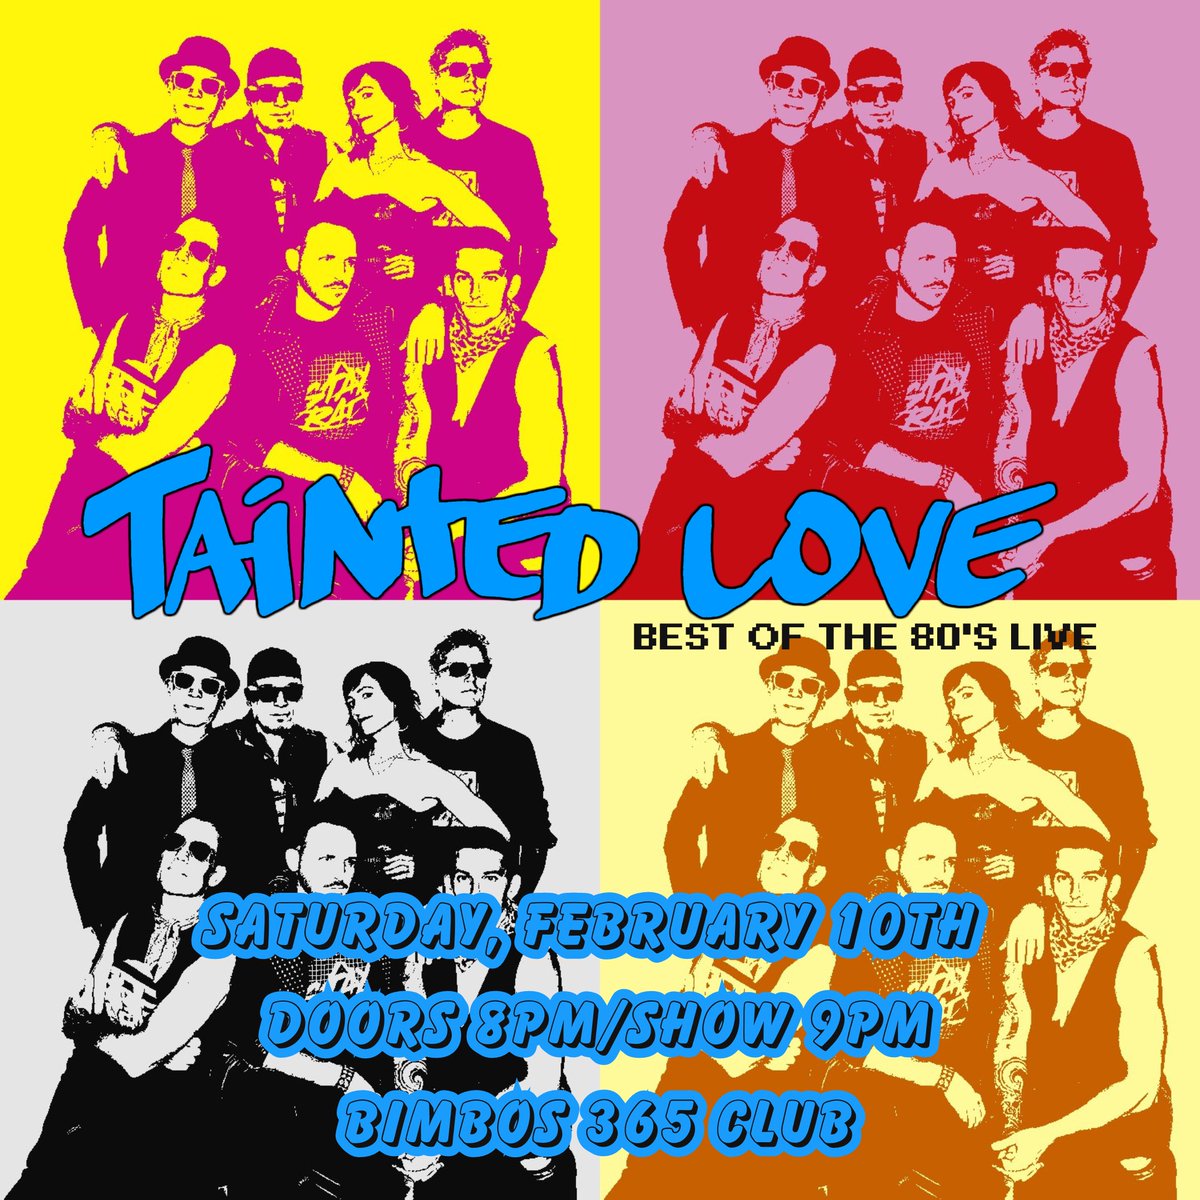 JUST ANNOUNCED!! Tainted Love returns on Saturday, February 10th for another iconic performance! Grab your tickets NOW at the link in bio for a chance to dance the night away!